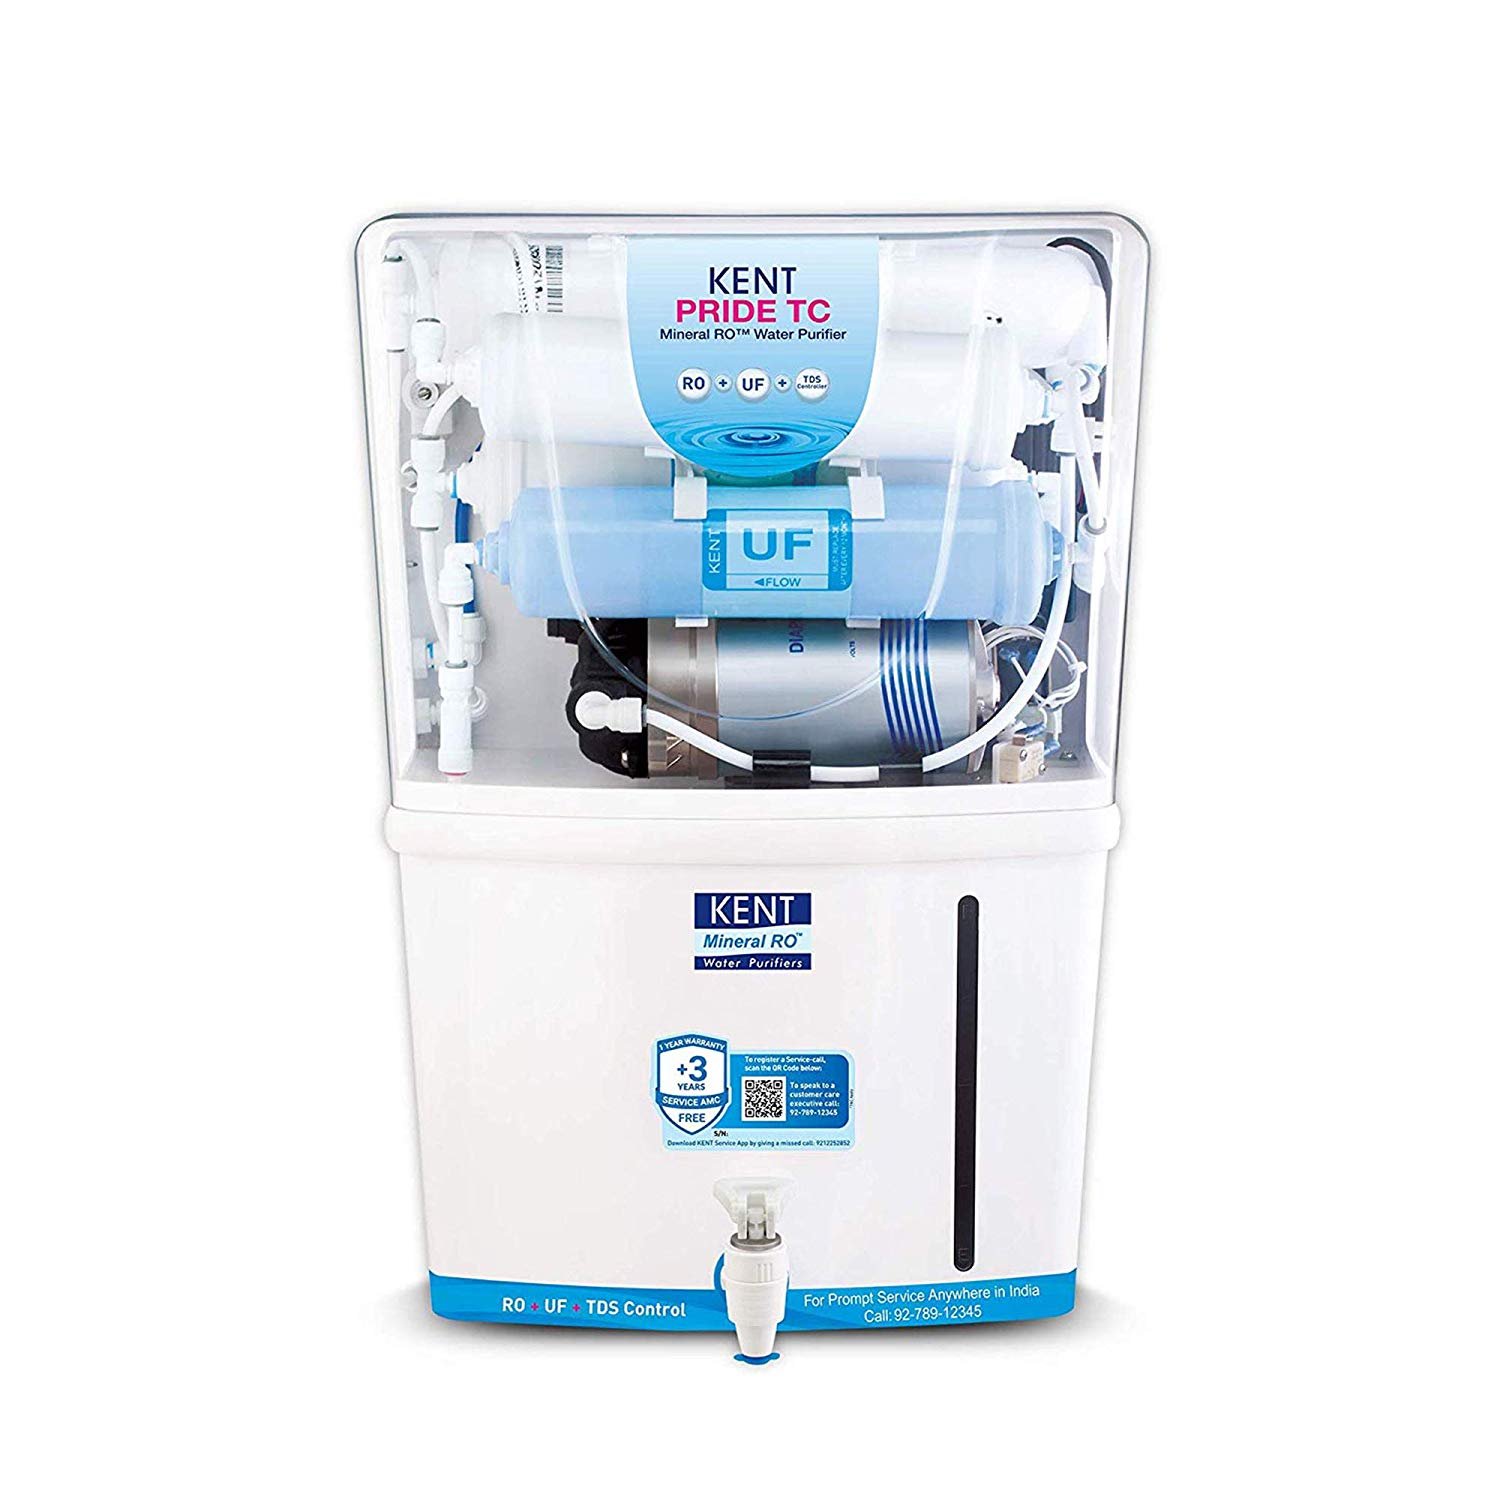 KENT 11087 Pride TC Mineral RO Water Purifier